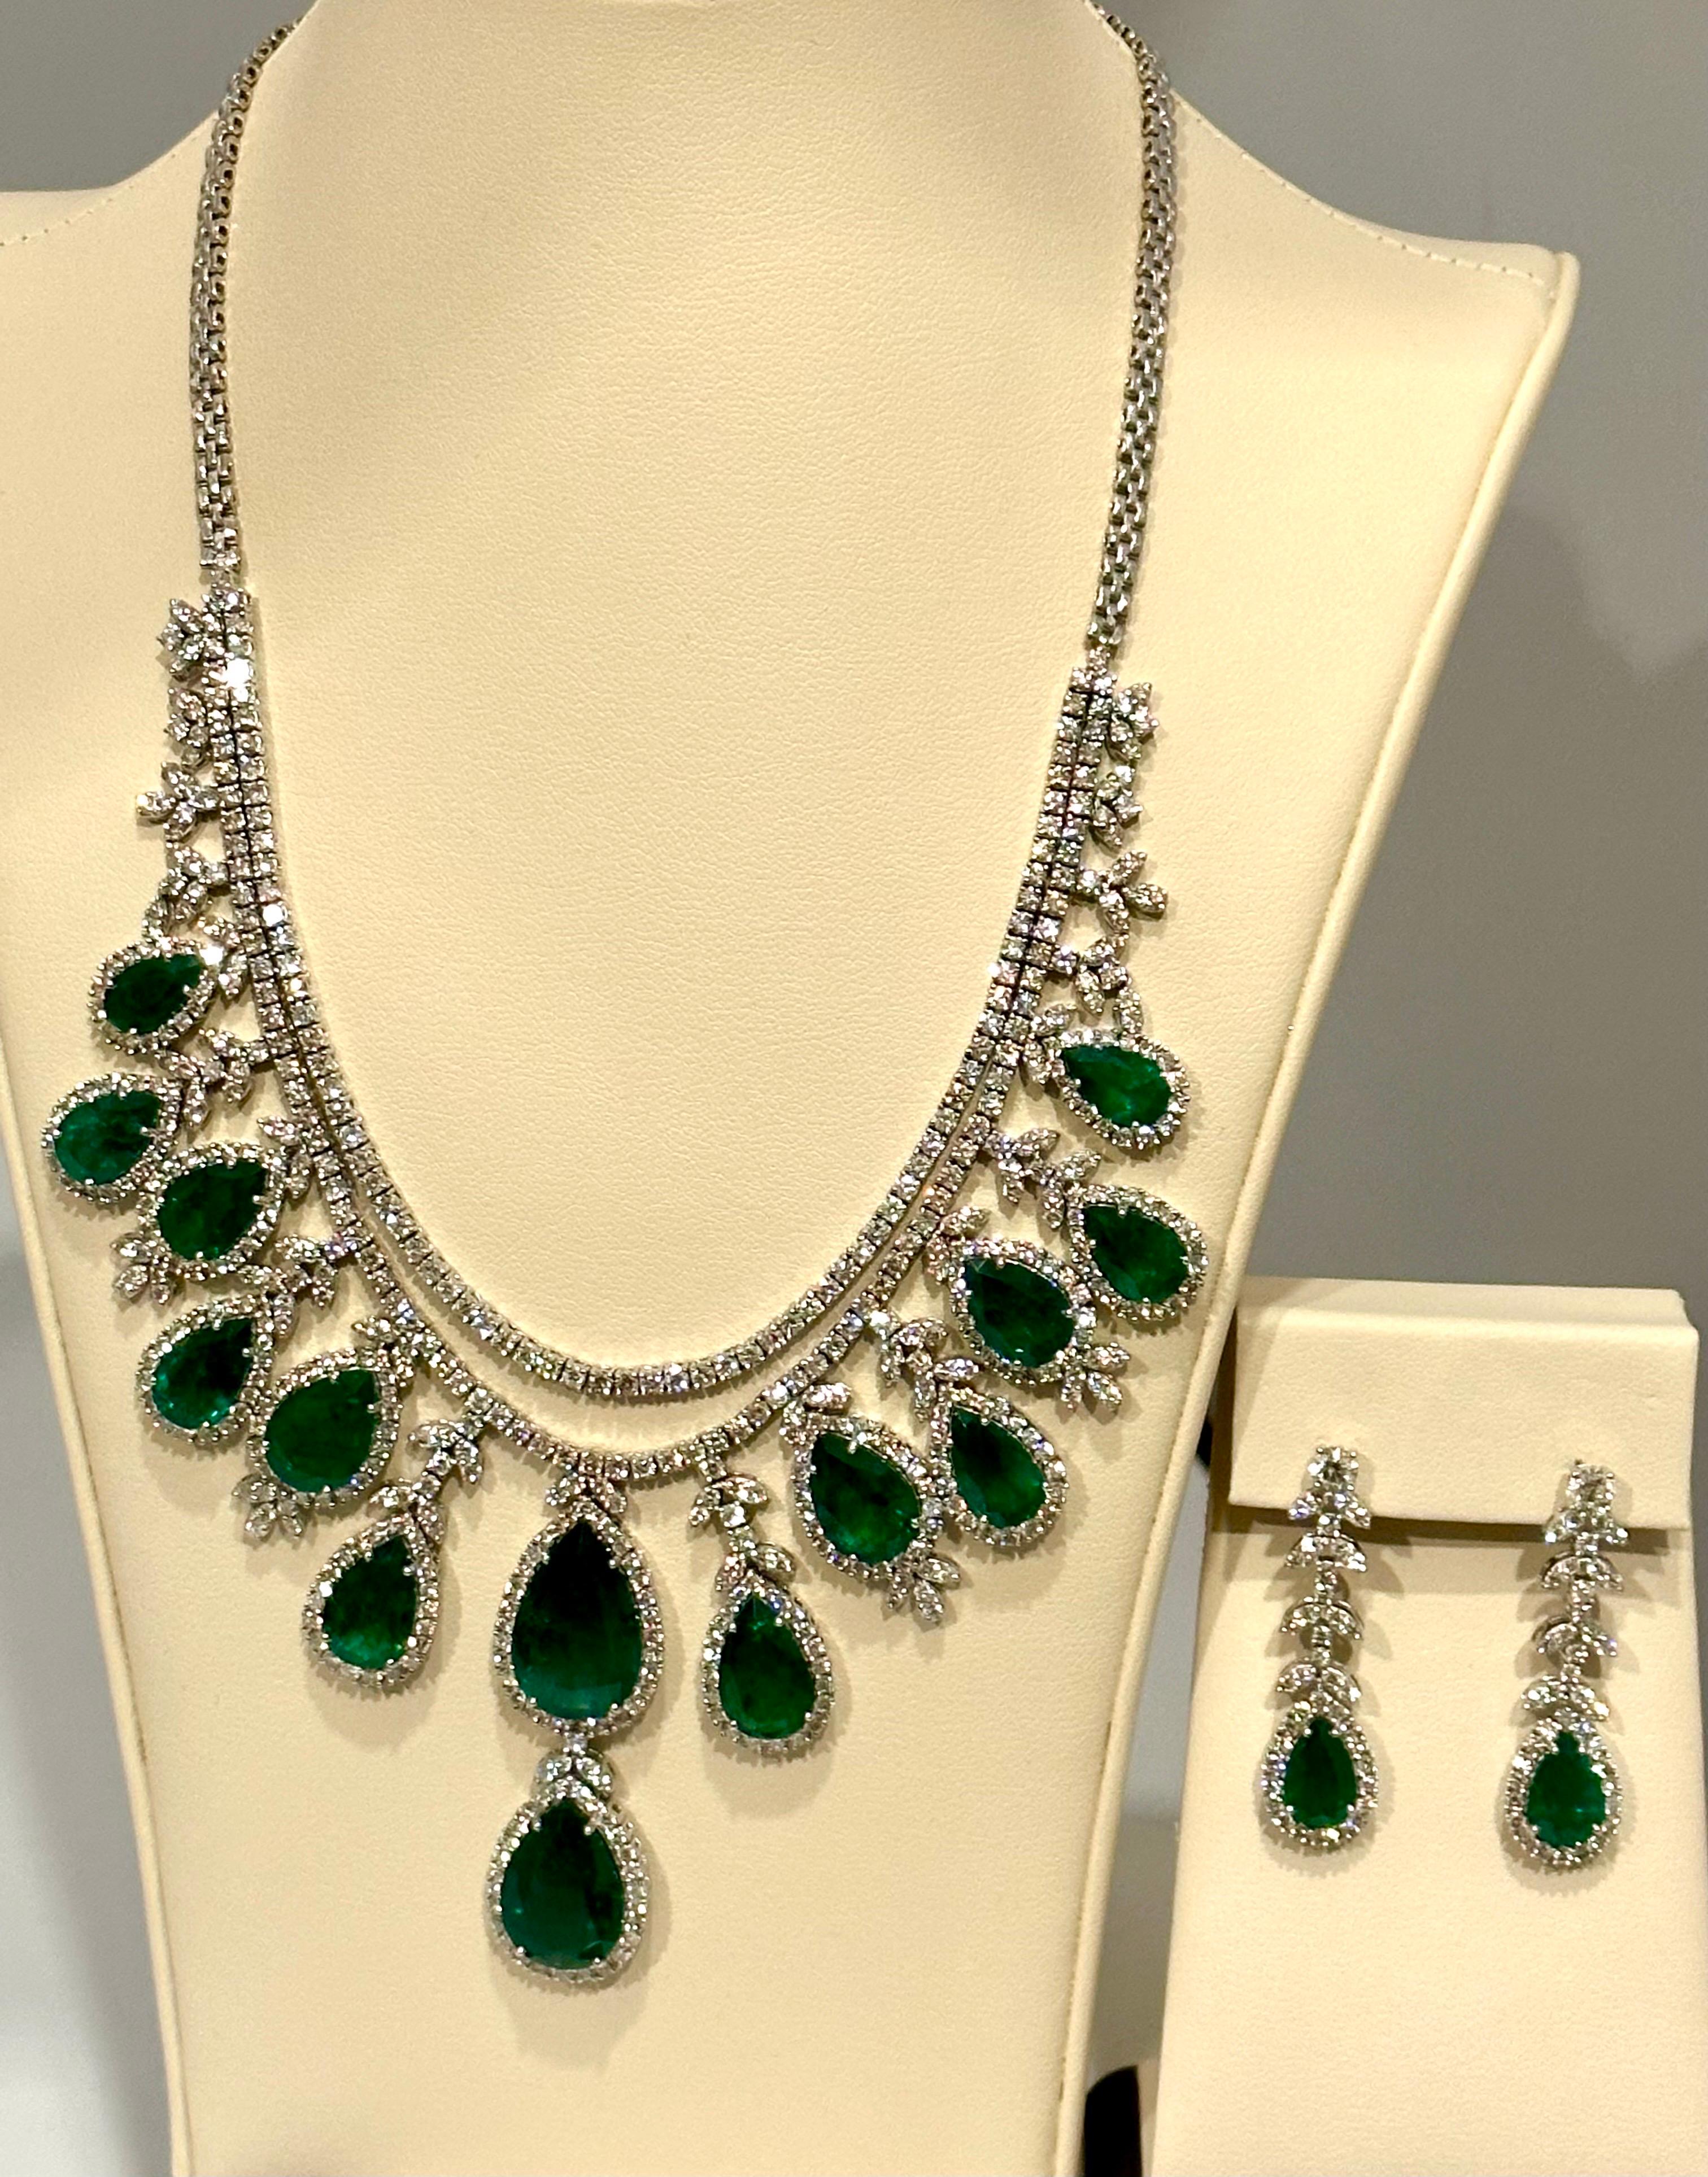 75 Ct Zambian Emerald and 30 Ct Diamond Necklace and Earring Bridal Suite For Sale 3